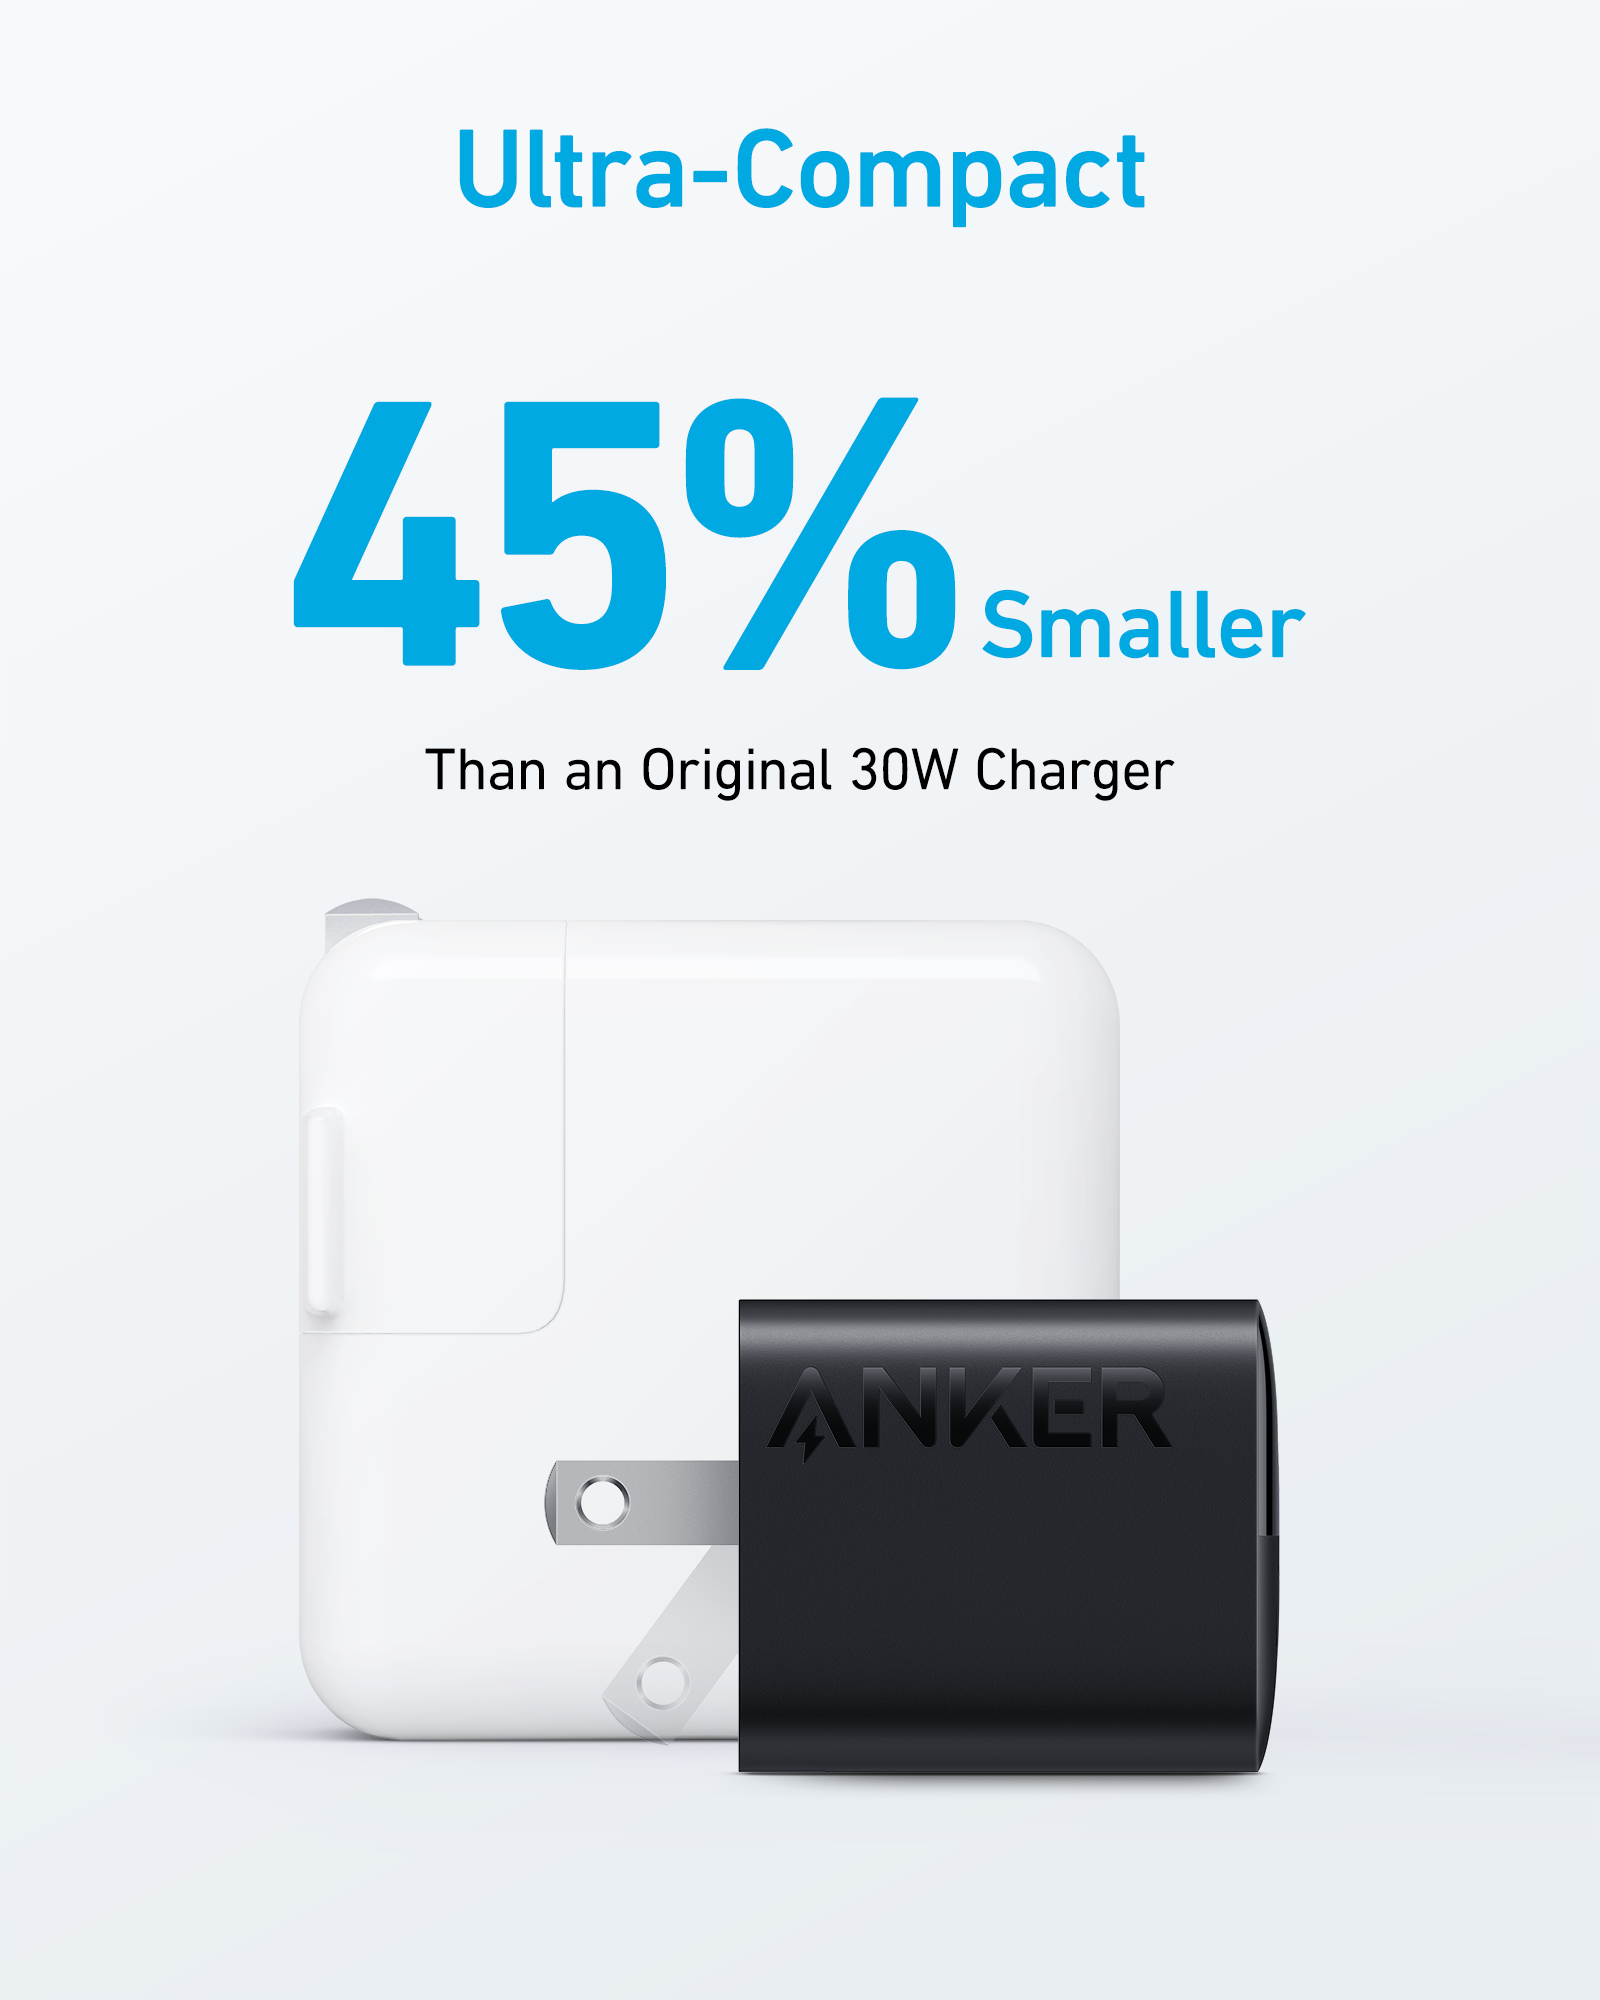 Anker USB C Charger 323 Charger (33W) 2 Port Compact Charger for